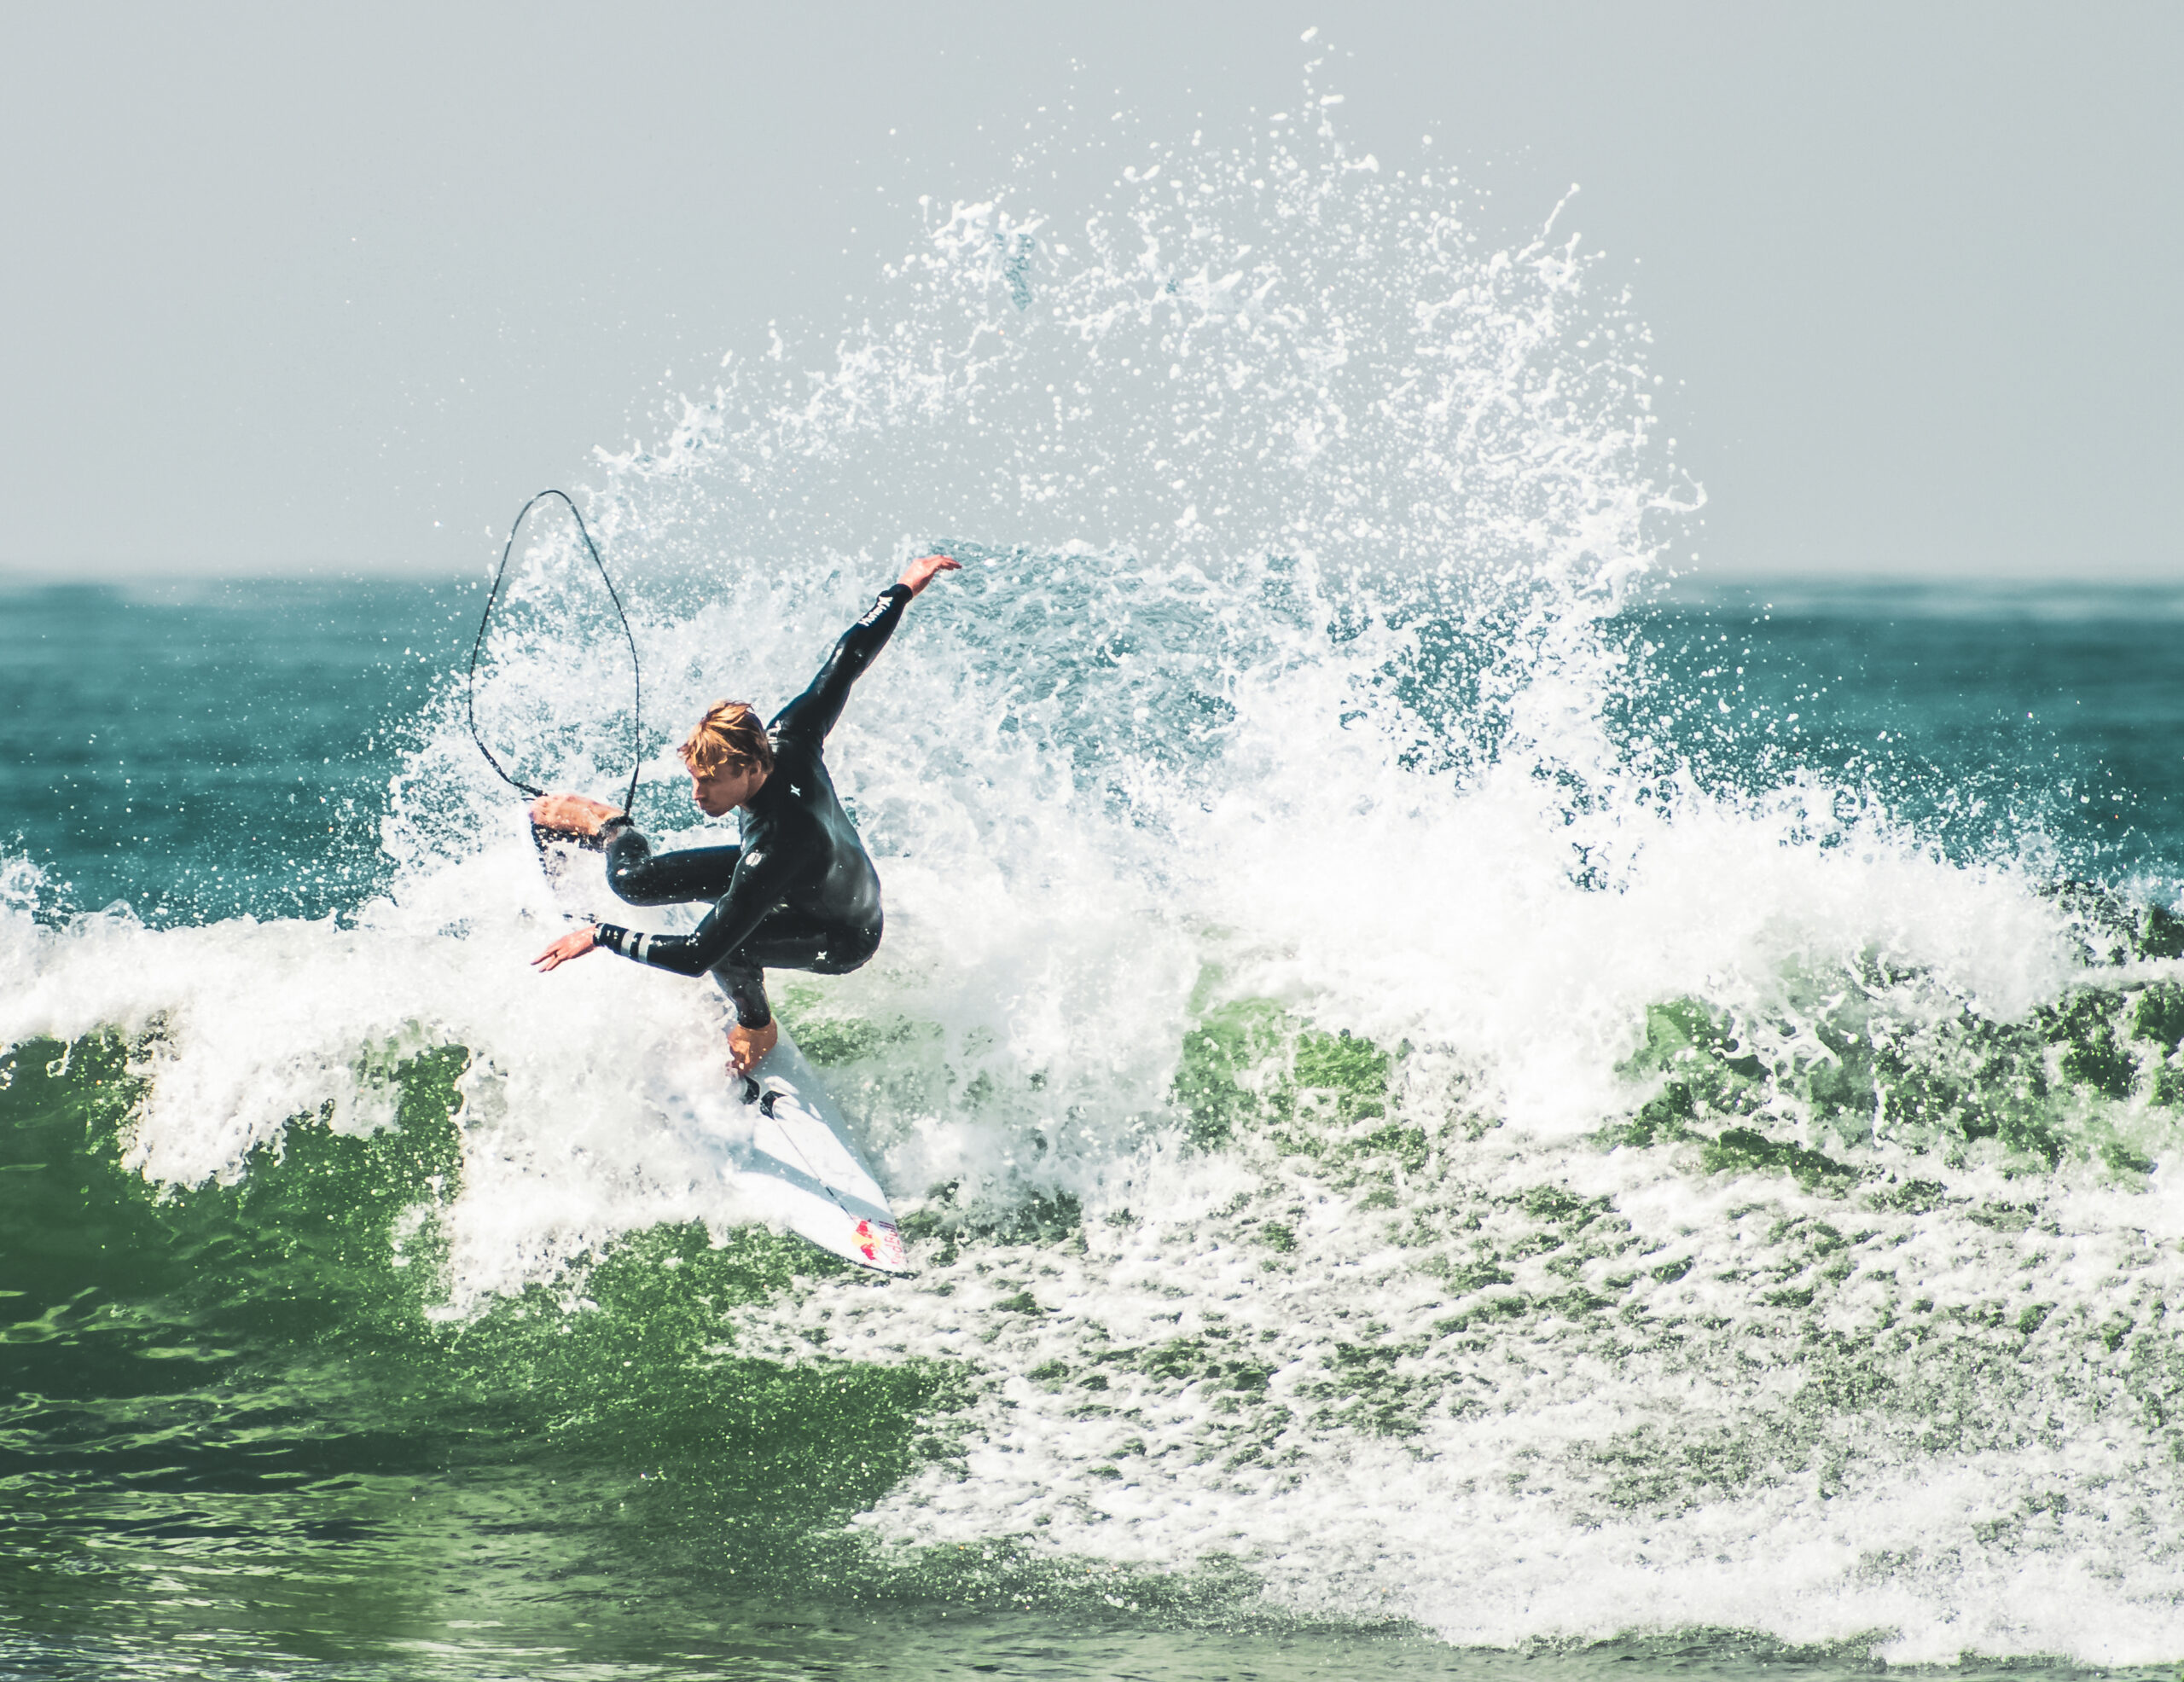 kolohe andino surfing lower trestles, realising the fins and throwing spray. photo by Rob Wessels.